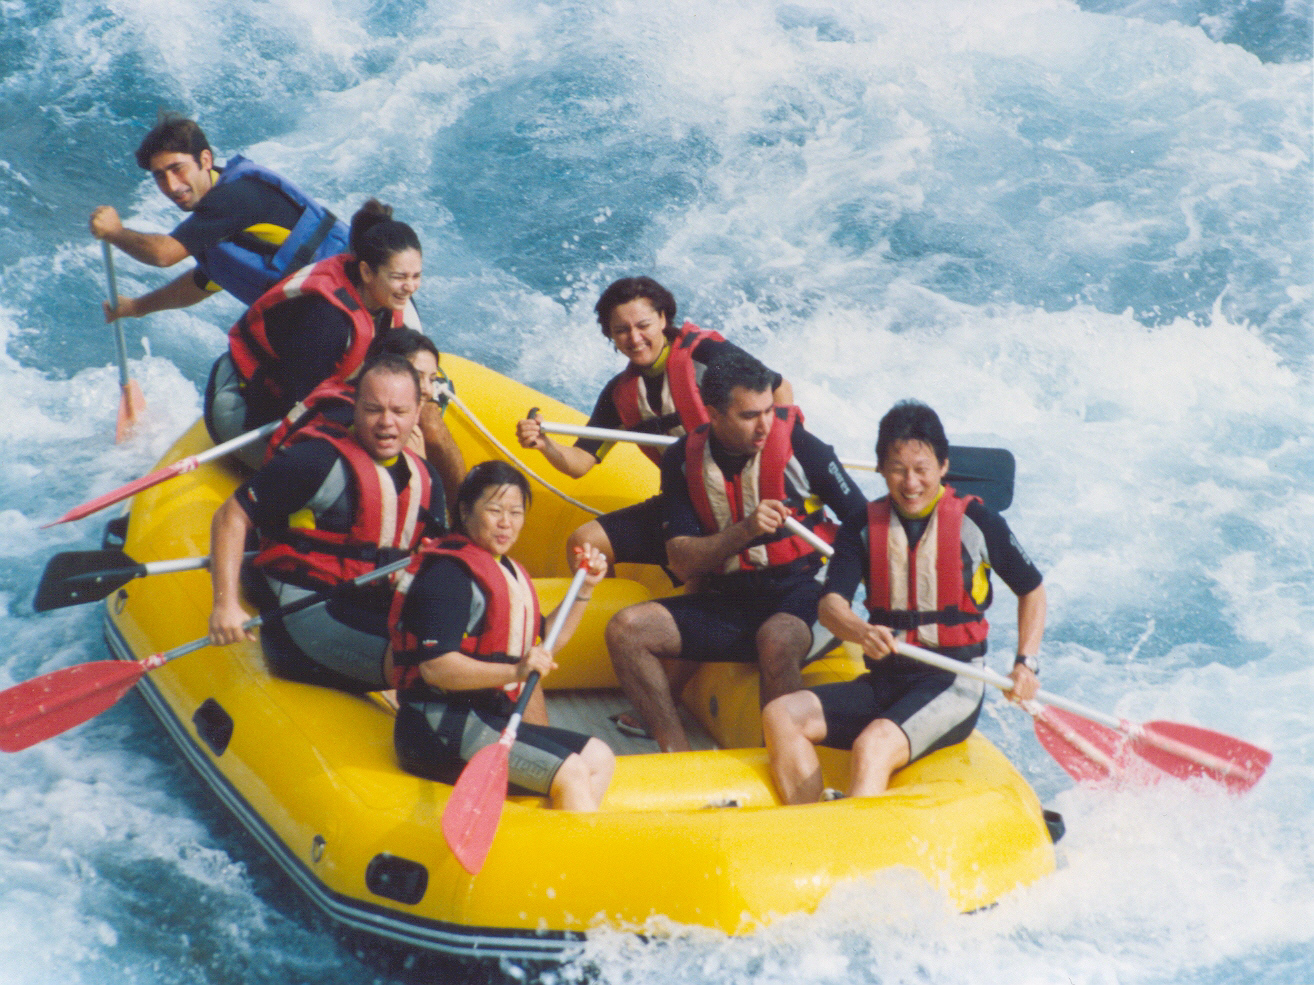 Raymond at a rafting teambuilding activity with his Citibank colleagues in Turkey in 2005.